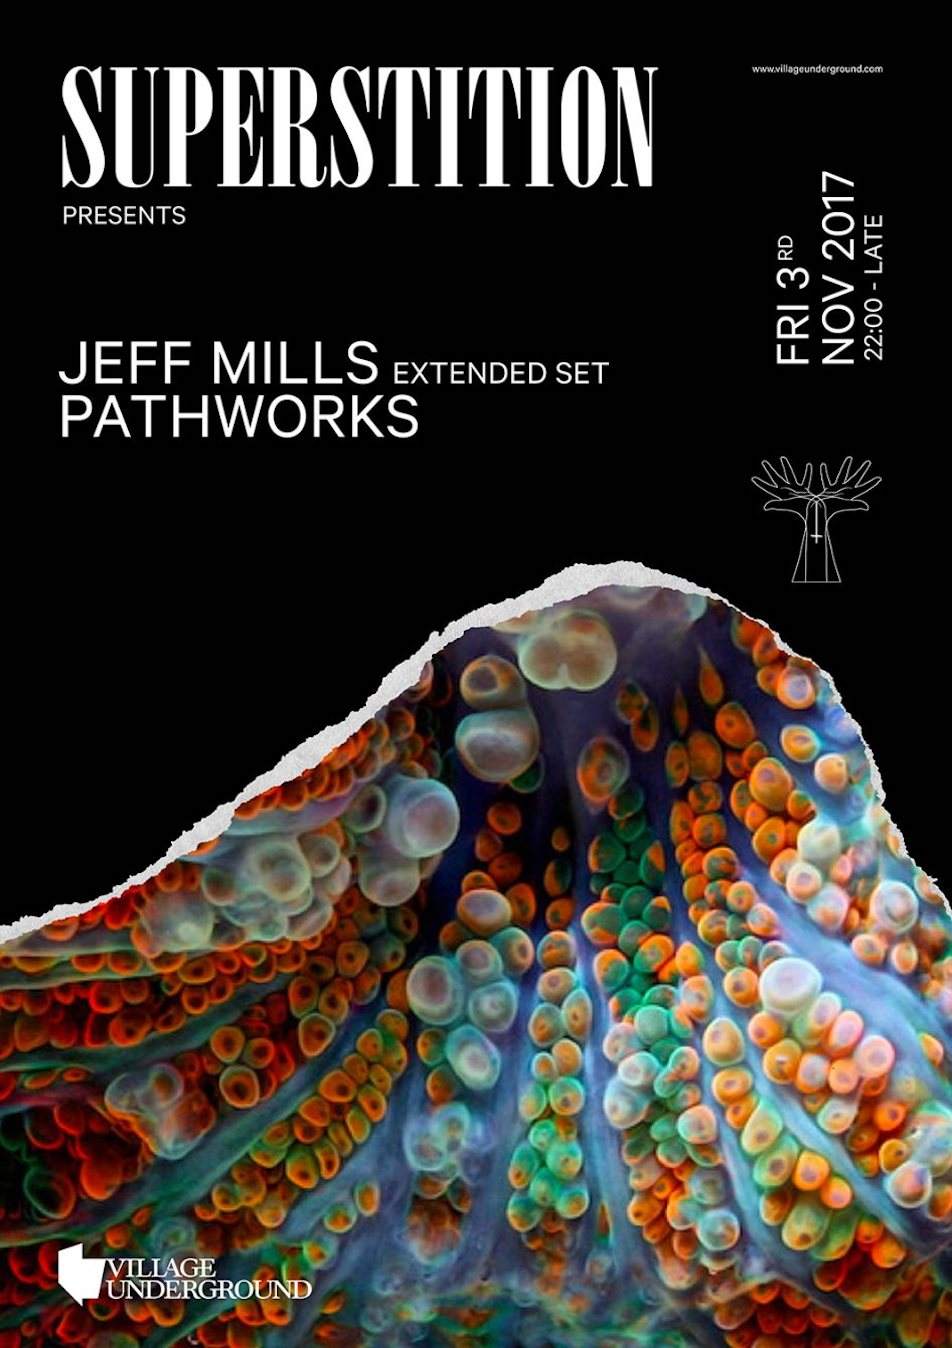 Jeff Mills booked for London's Village Underground image